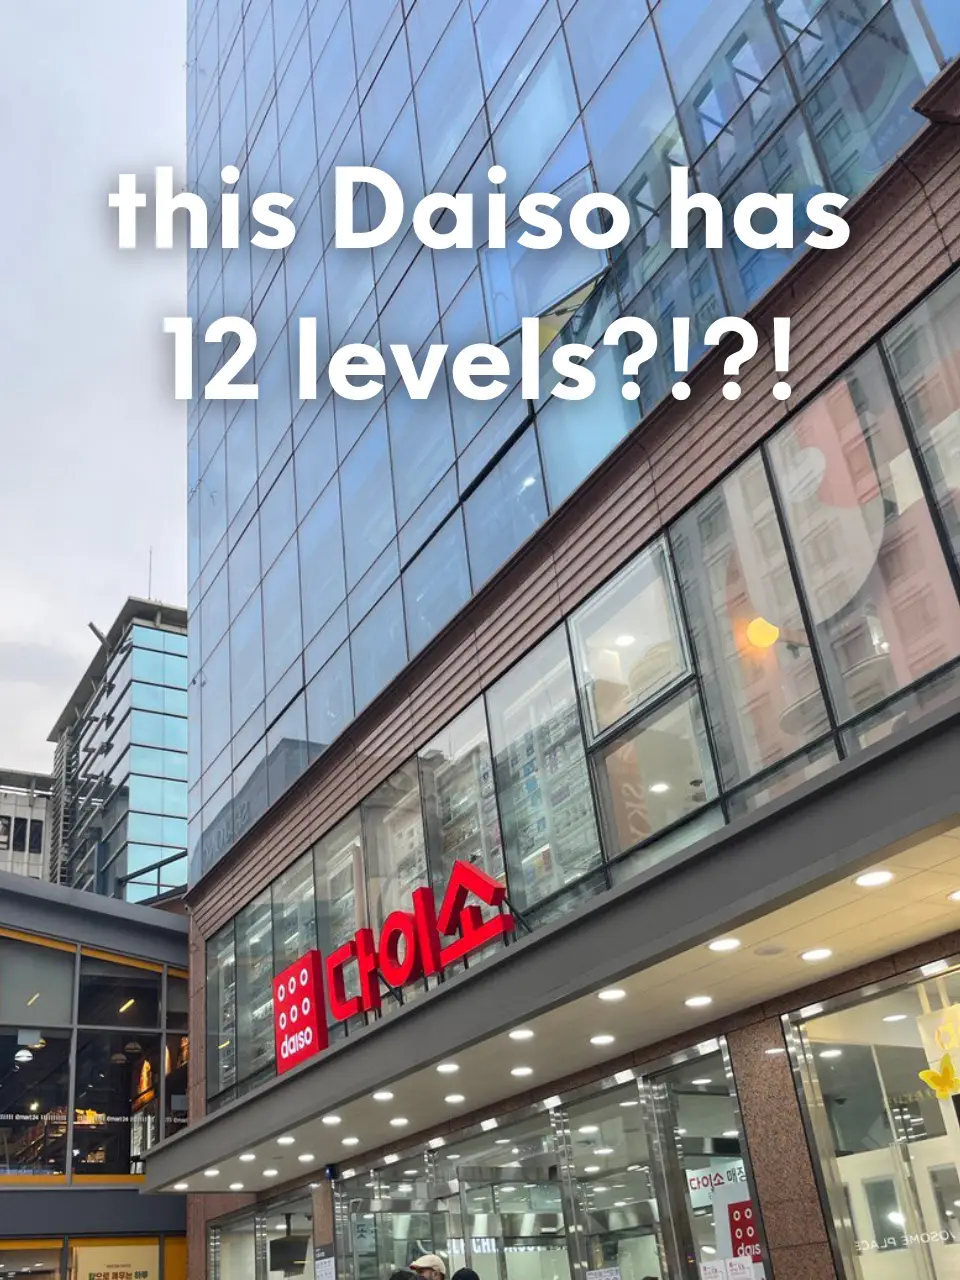 5 Cheap Car Interior Accessories from Daiso You Must Have